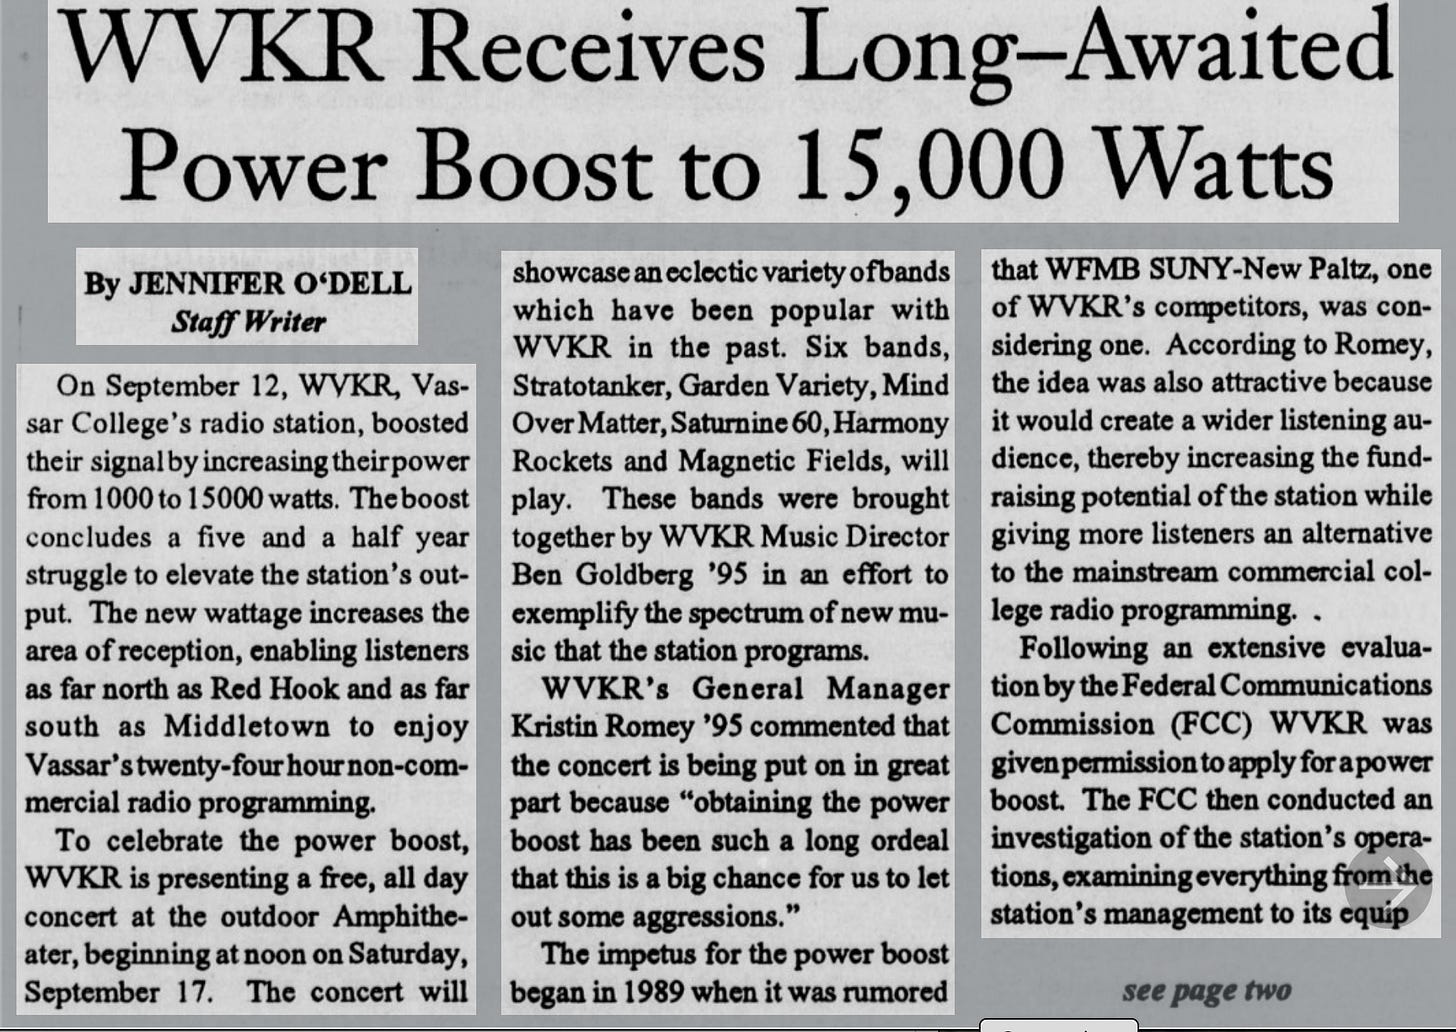 WVKR Receives Long-Awaited Power Boost to 15,000 Watts | screenshot of the Vassar College Miscellany news--transcript in the link: https://newspaperarchives.vassar.edu/?a=d&d=miscellany19940916-01.2.2&e=-------en-20--1--txt-txIN--------